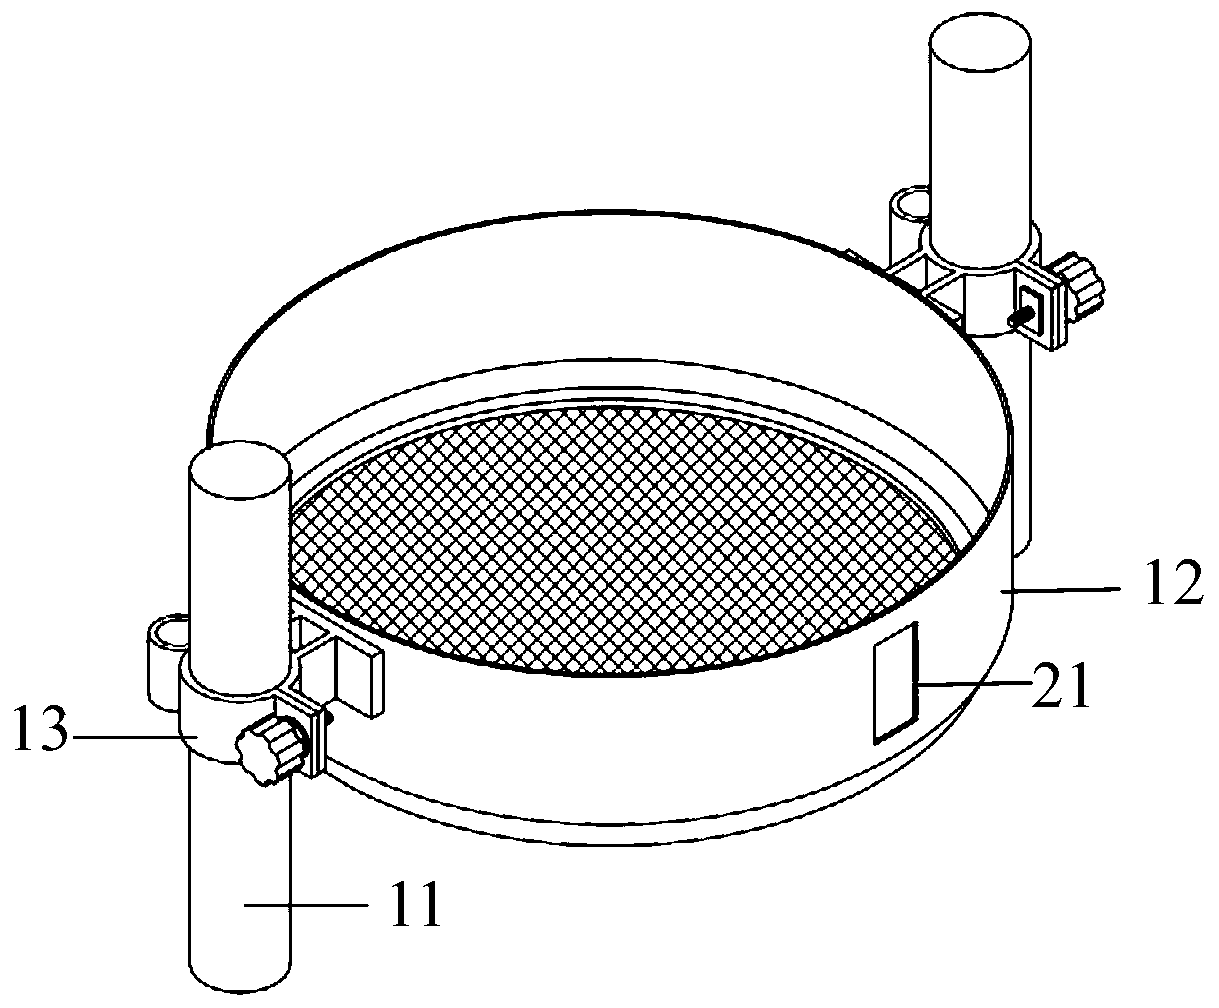 Anti-blocking synchronous collection system for multi-particle-size micro-plastic in water body